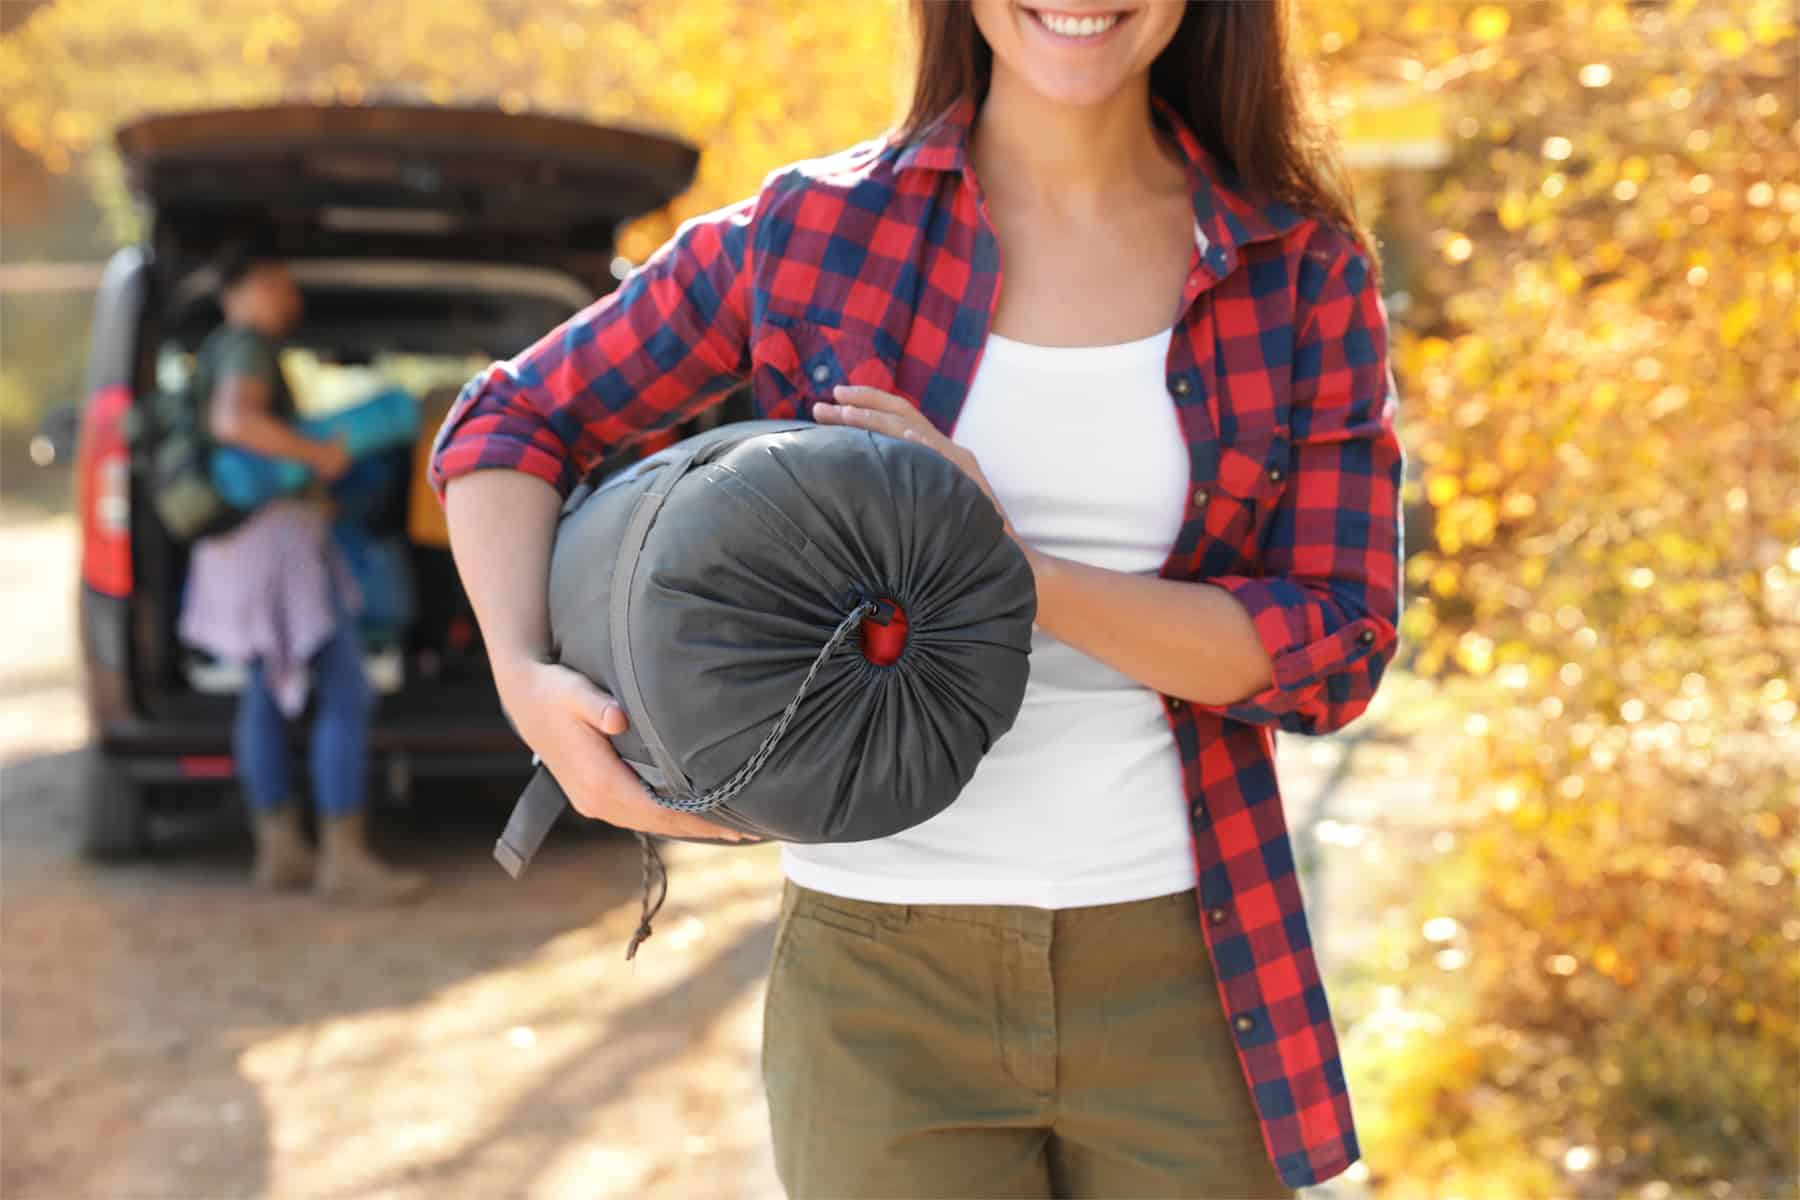 This is the cover photo for our Best Sleeping Bag for Camping article. It features a woman holdings a sleeping bag with a man loading a vehicle in the background.